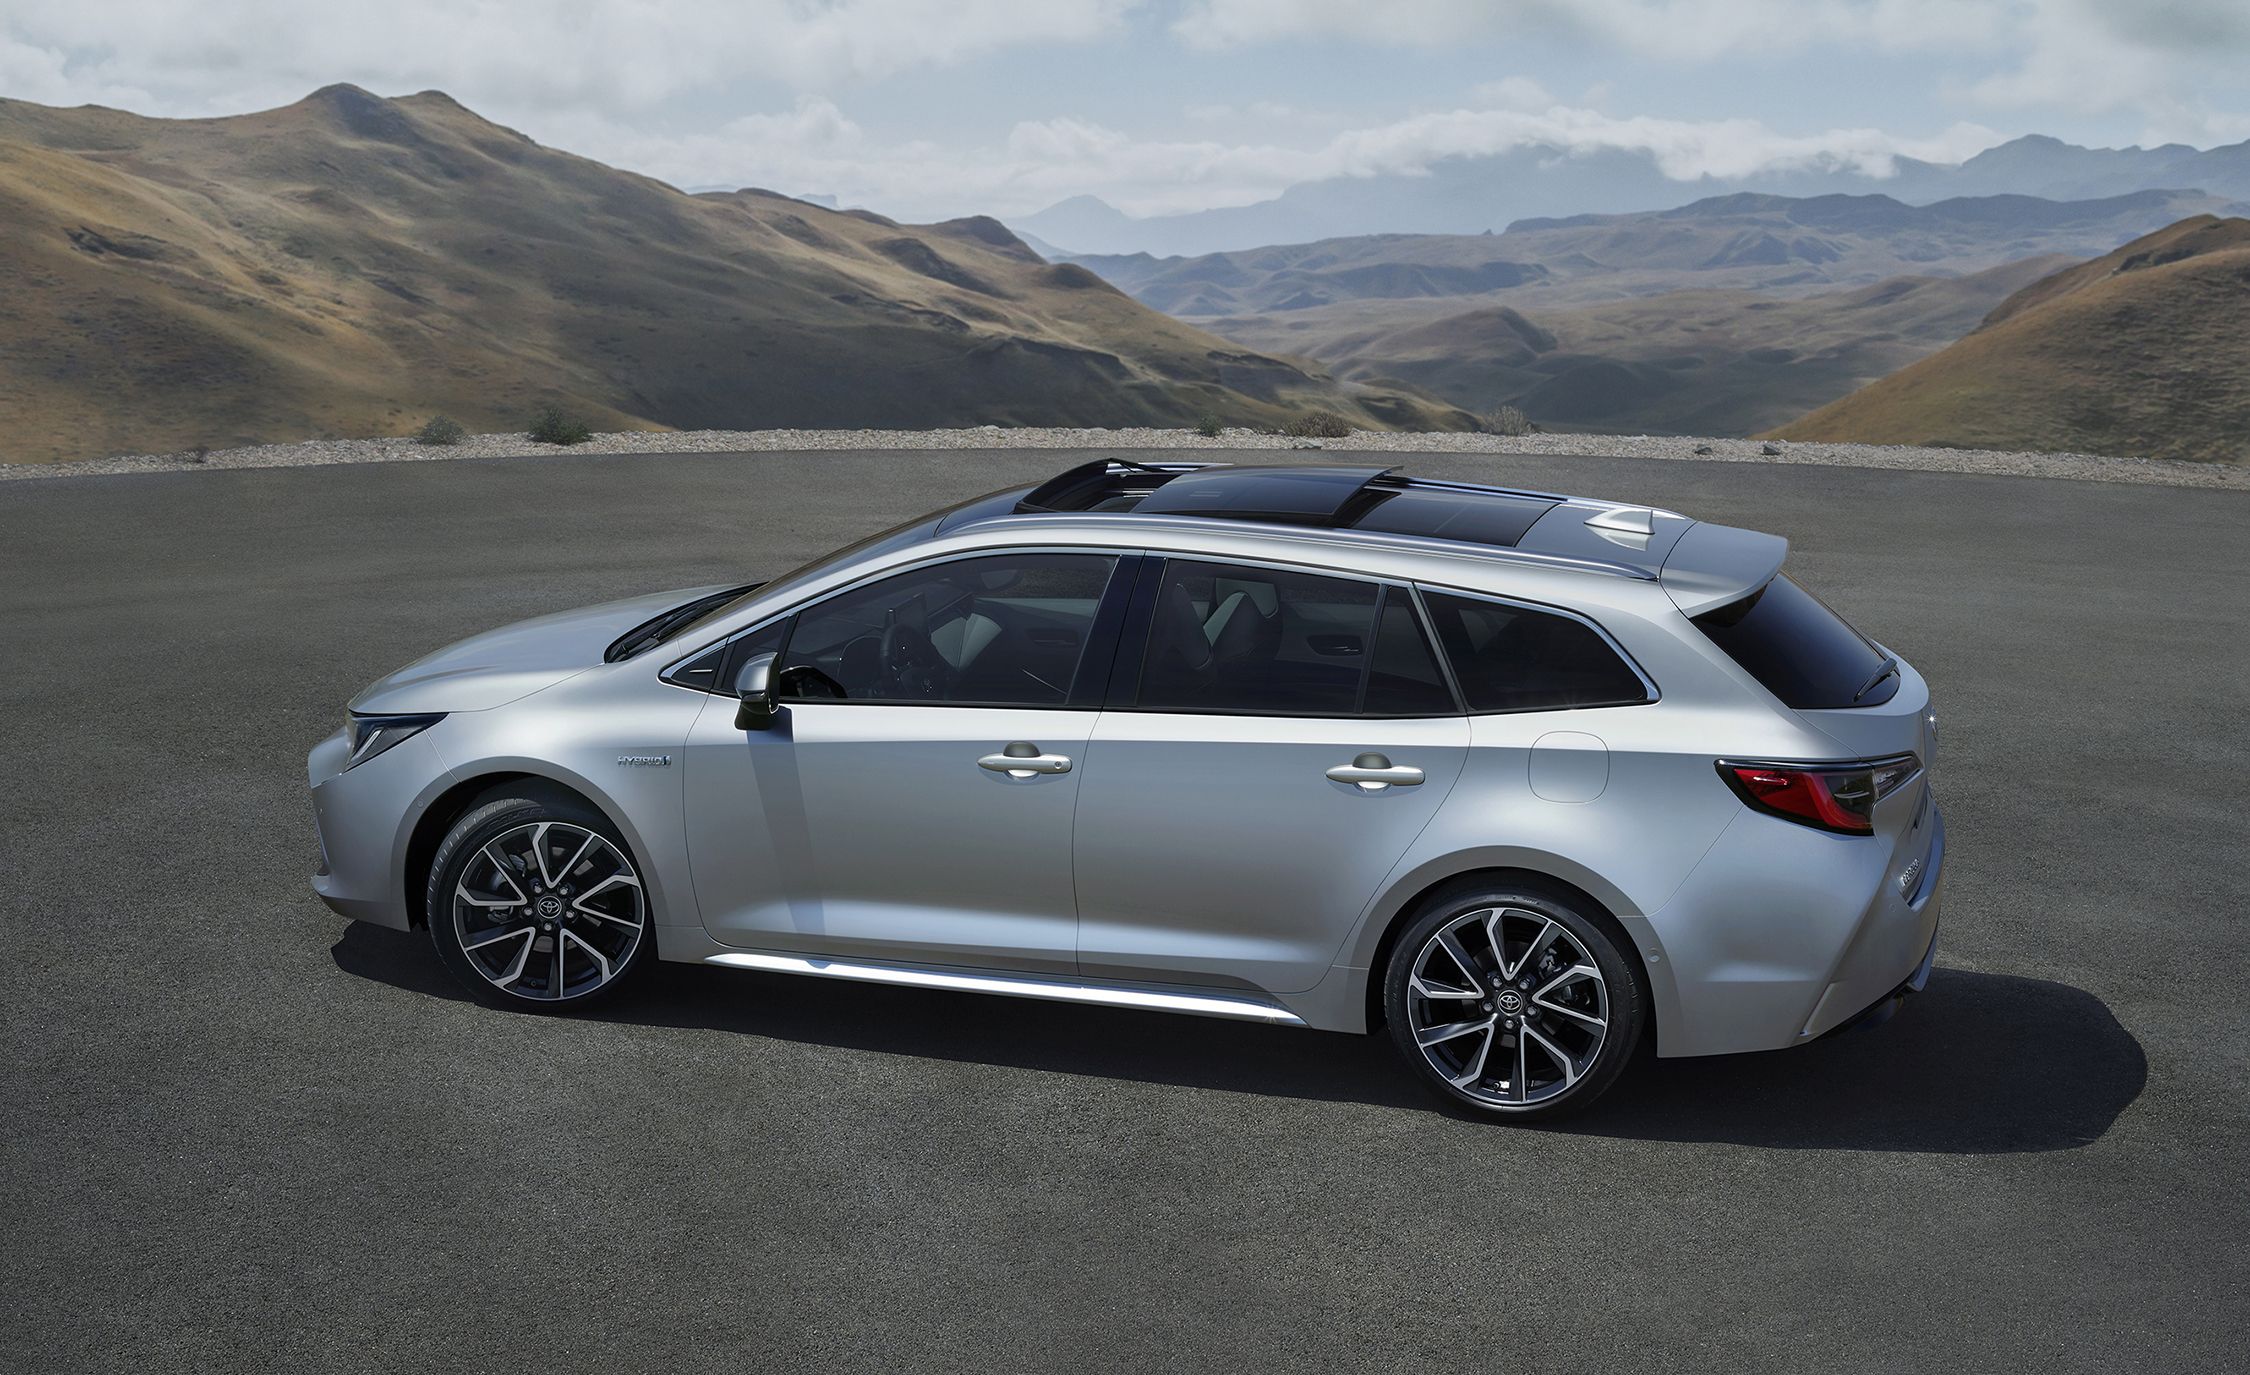 pond Fantastisch Misbruik New Toyota Corolla Wagon Looks Good — Touring Sports Revealed for Europe